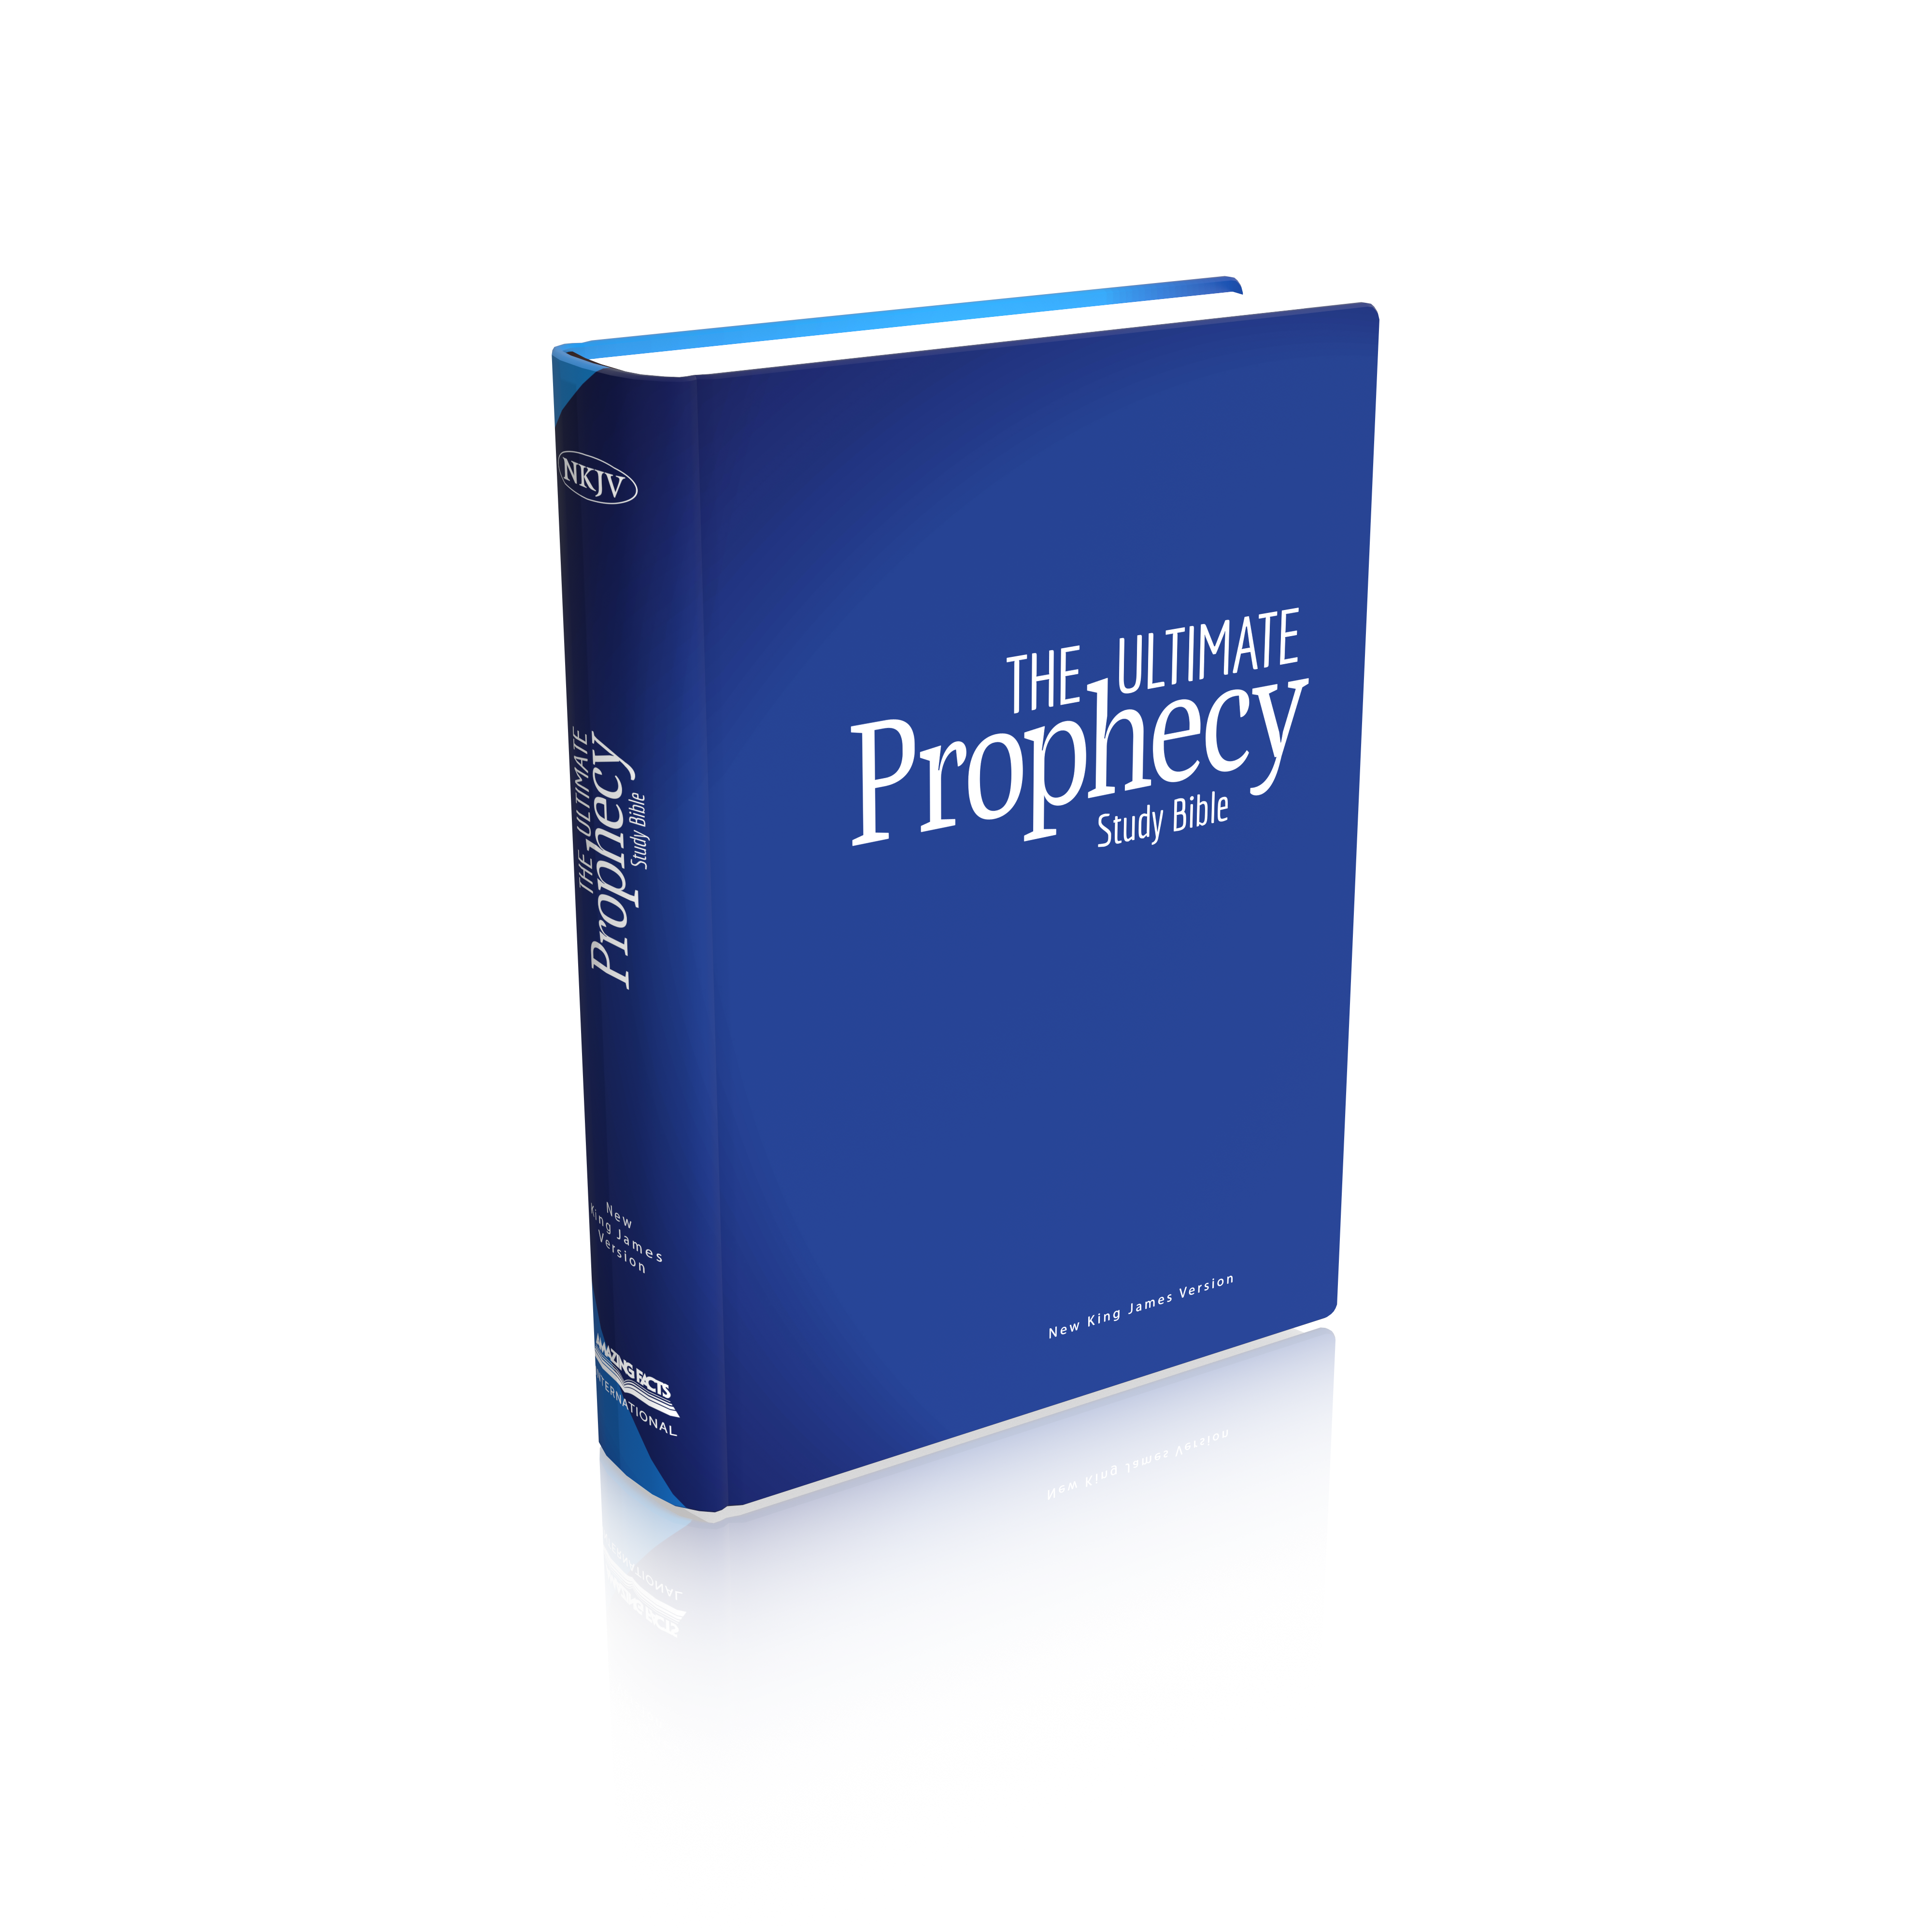 Pre-Order Now! The Ultimate Prophecy Study Bible - Hardcover by Amazing Facts